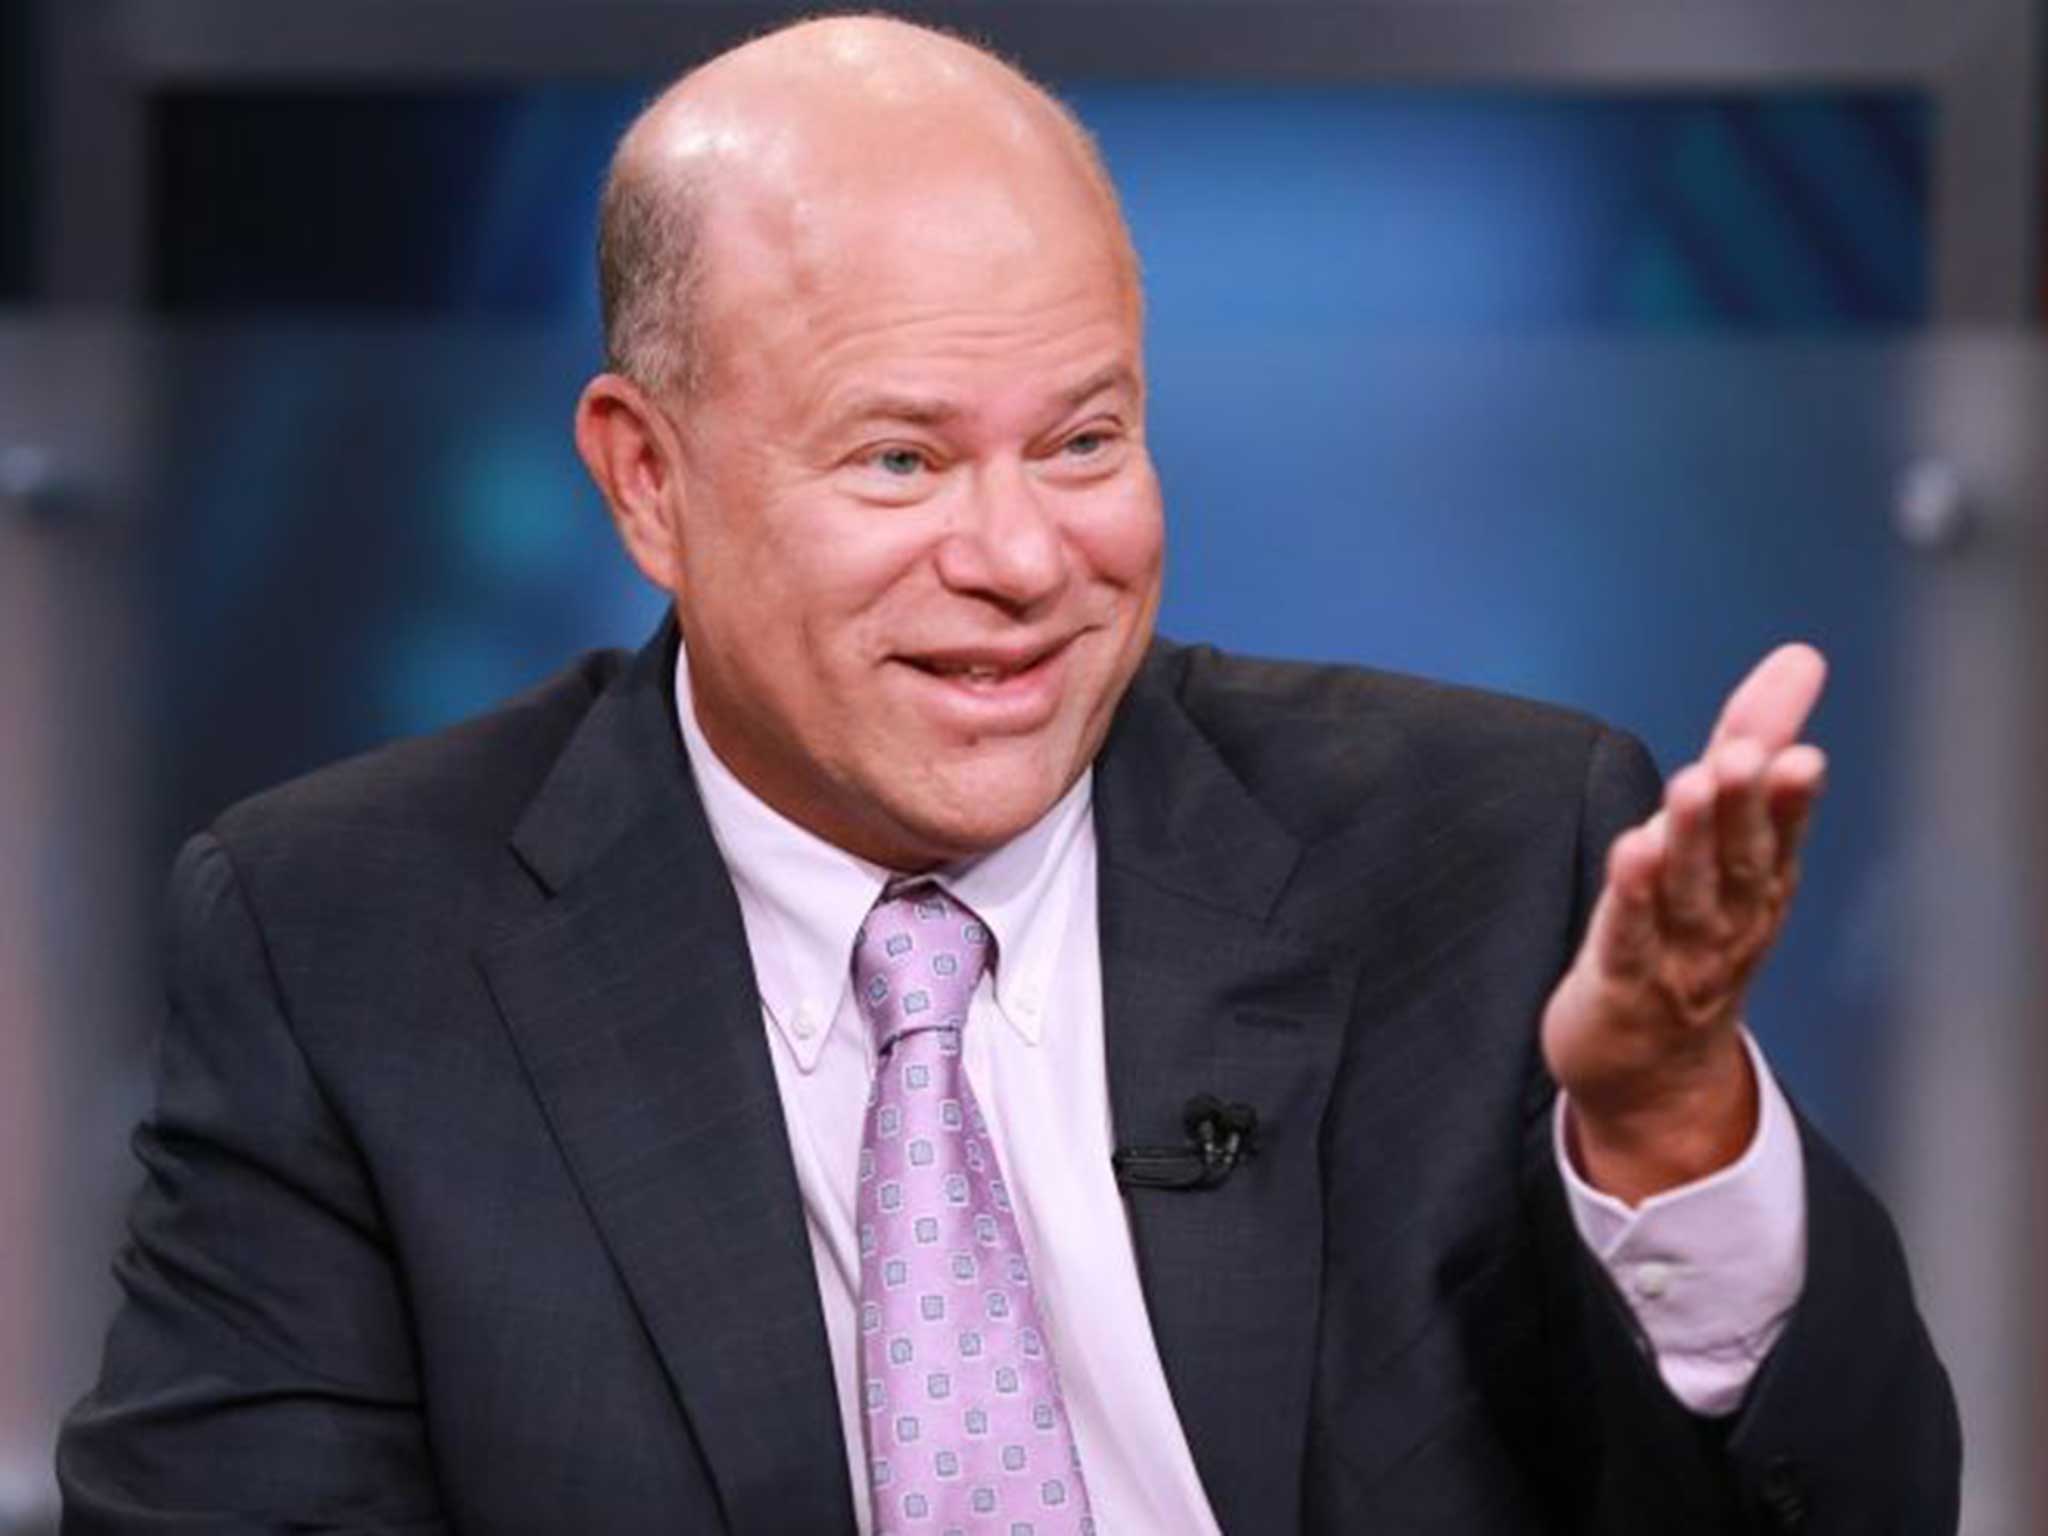 Mr Tepper went on to found a hugely successful hedge fund